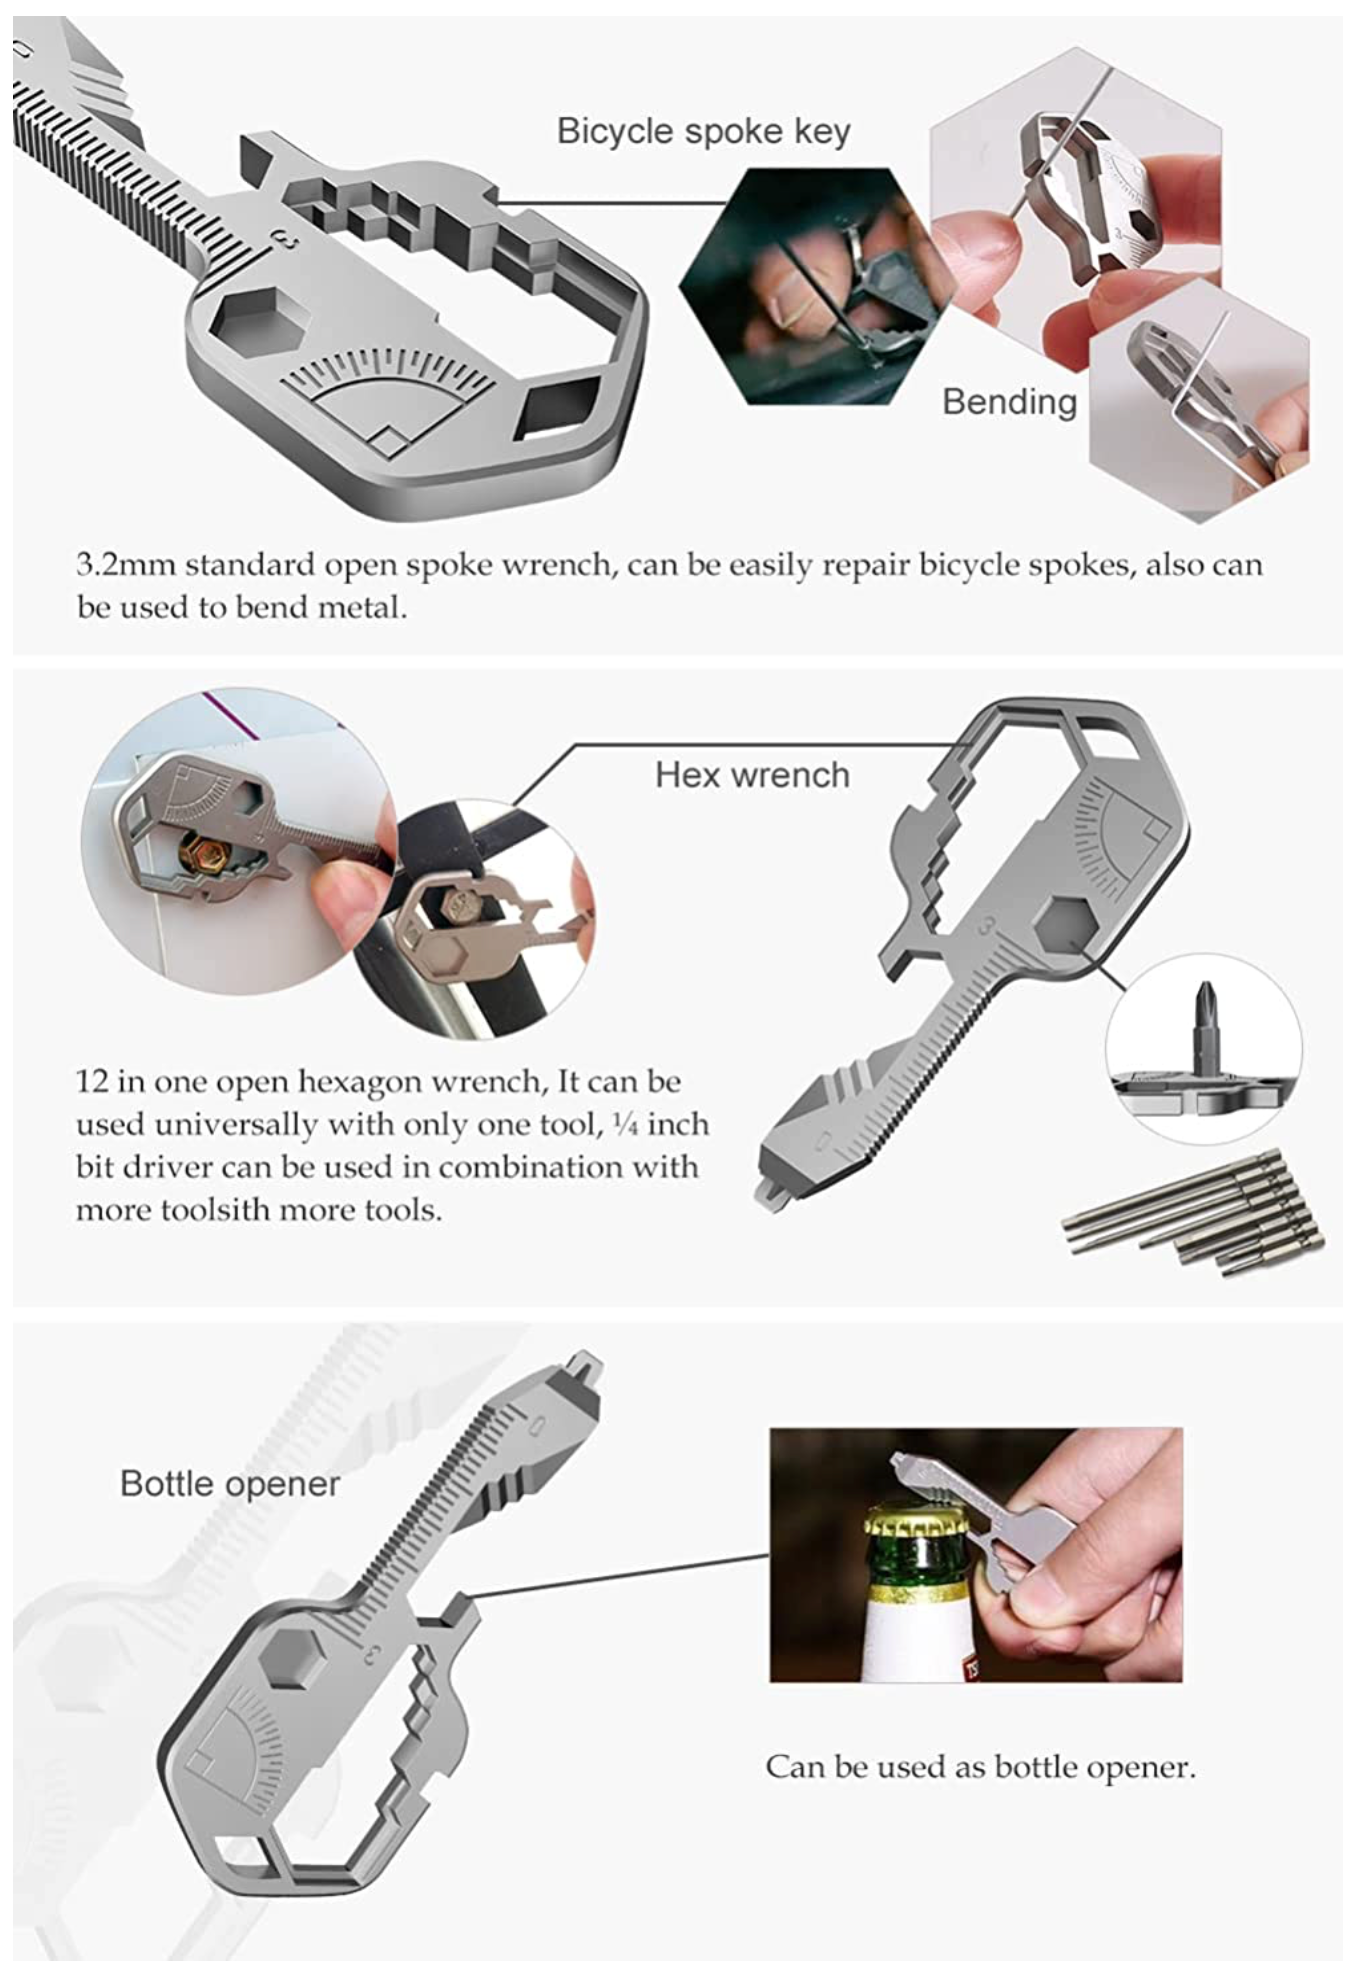 Tools Outdoor Multifunctional Keychain,Multi-functional Tool Wrench, Outdoor  Camping Supplies 